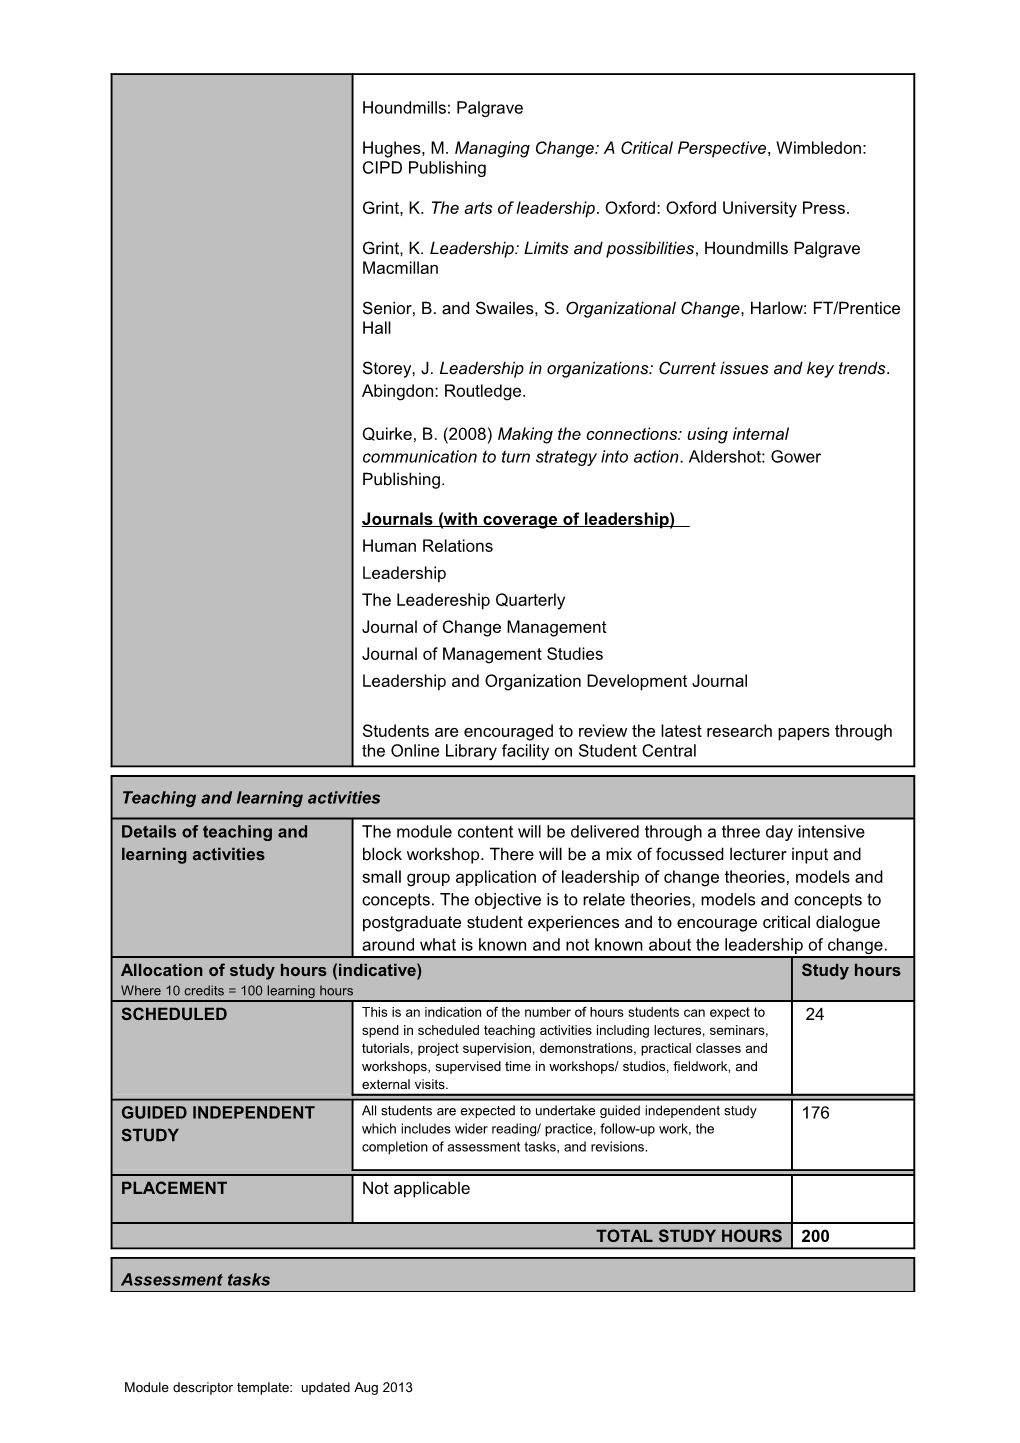 Module Specification Template s4